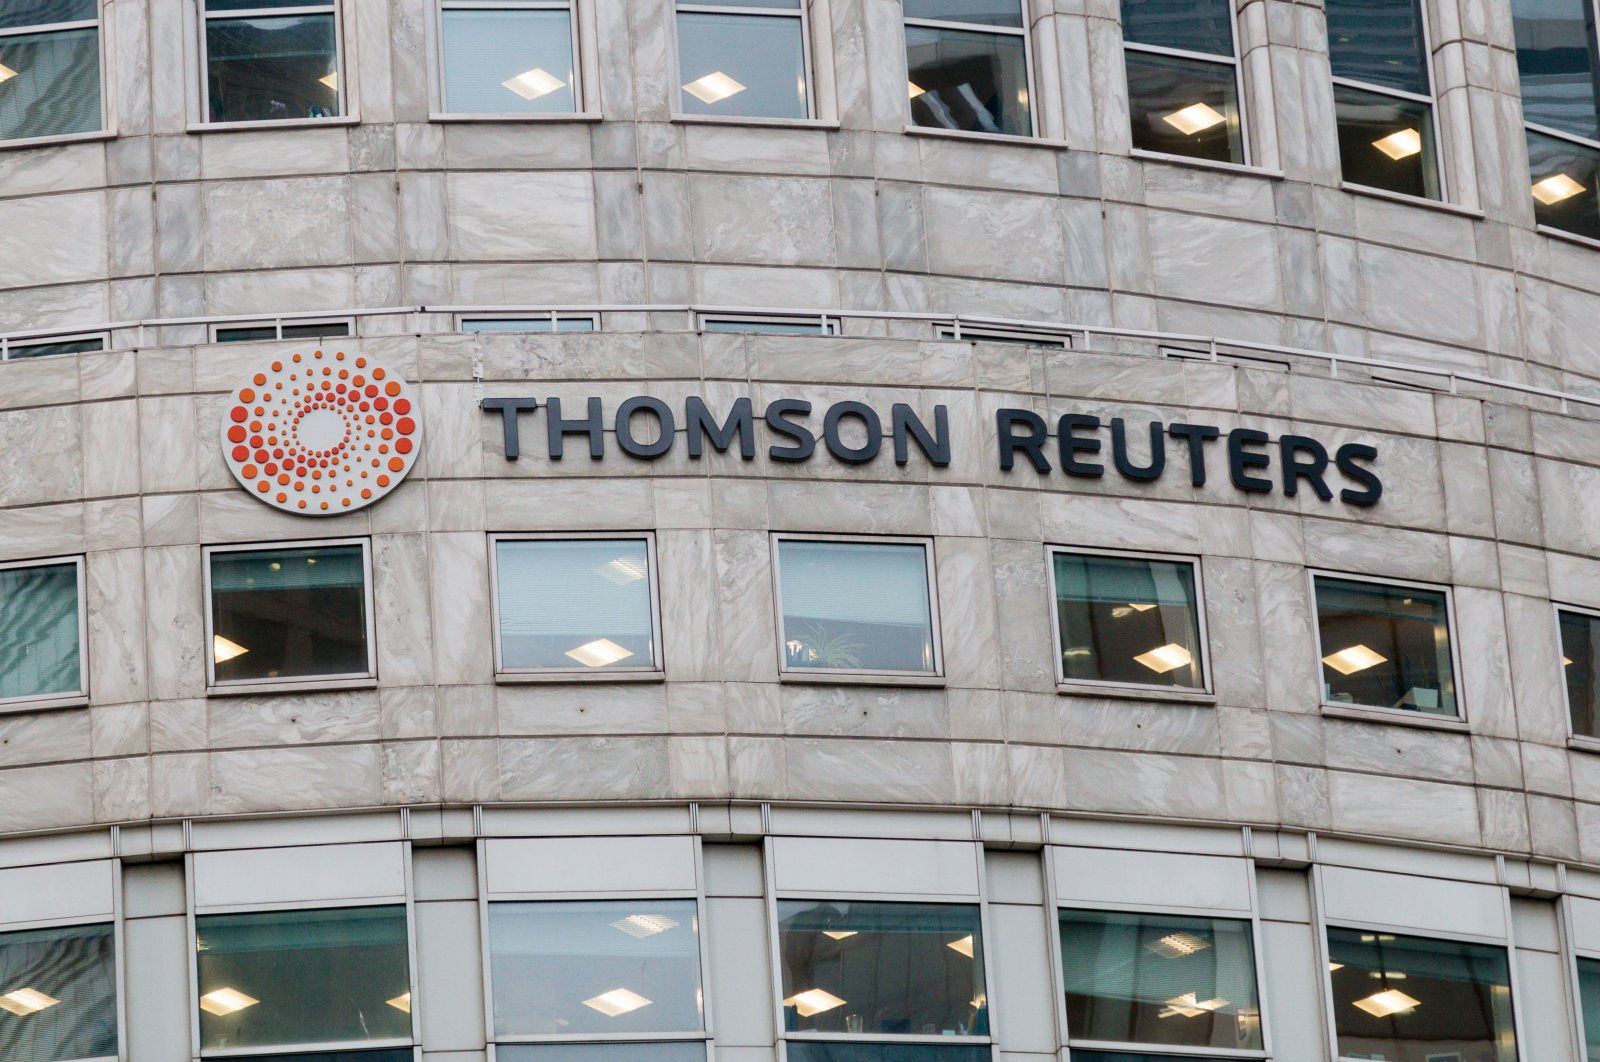 The Thomson Reuters headquarters building in Canary Wharf, London, Britain, Nov. 15, 2017.(Shutterstock Photo)